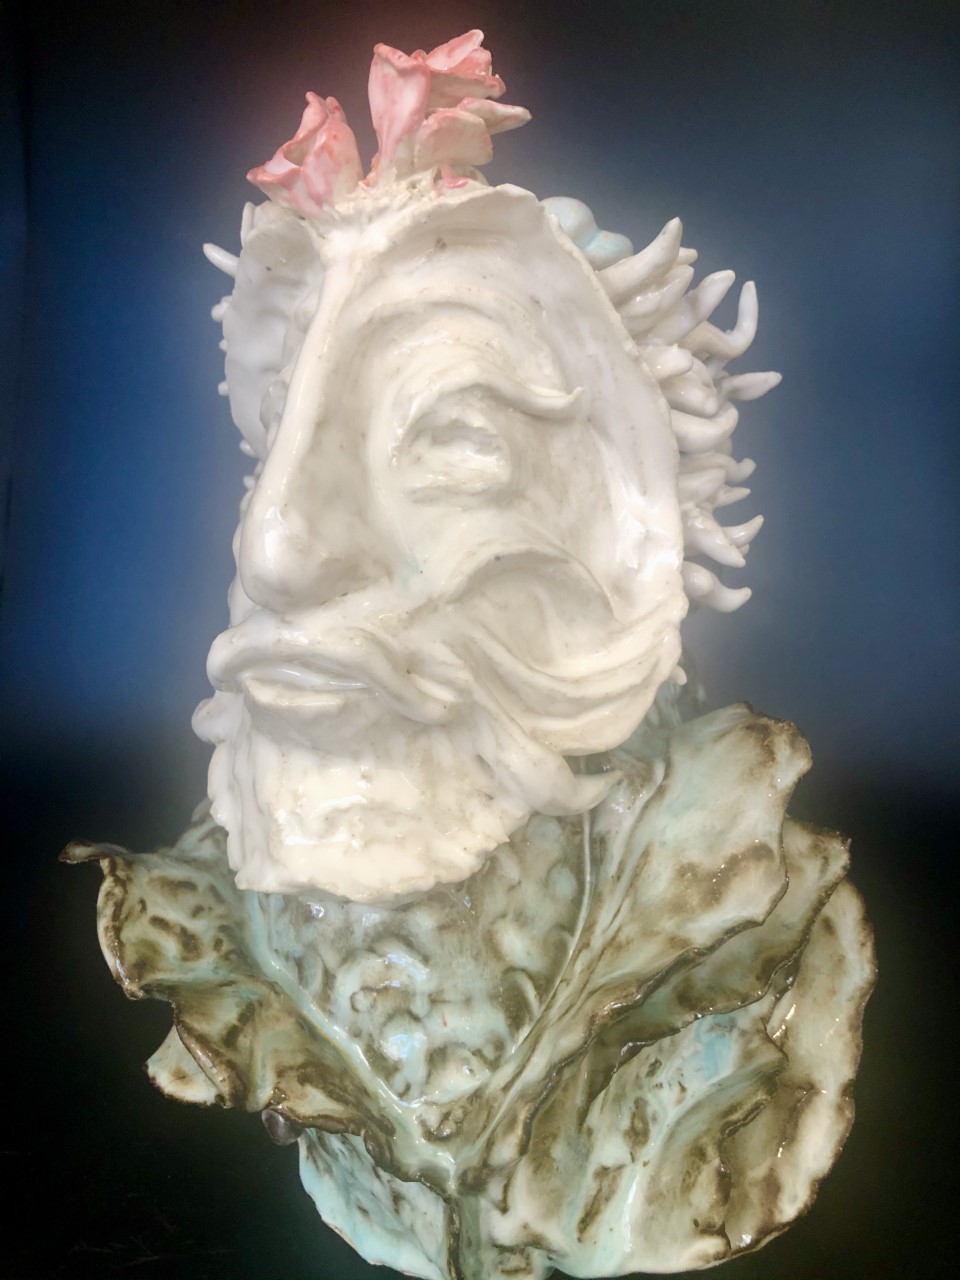 Title: Thereus
Artist: David Gwaltney
Size: 10x7x7
Medium: Clay
Statement: Ocean Reef Series...Hand built vase... Thereus, the mythical King and founder of Athens, He was challenged by KIng Minos of Crete to return his ring that he threw in the sea. He dived in a was lead  by a pod of dolphins to the Sea Goddess, Thetis. She gave him the ring and a jeweled crown. He returned the ring to MInos and kept the Crown for himself.